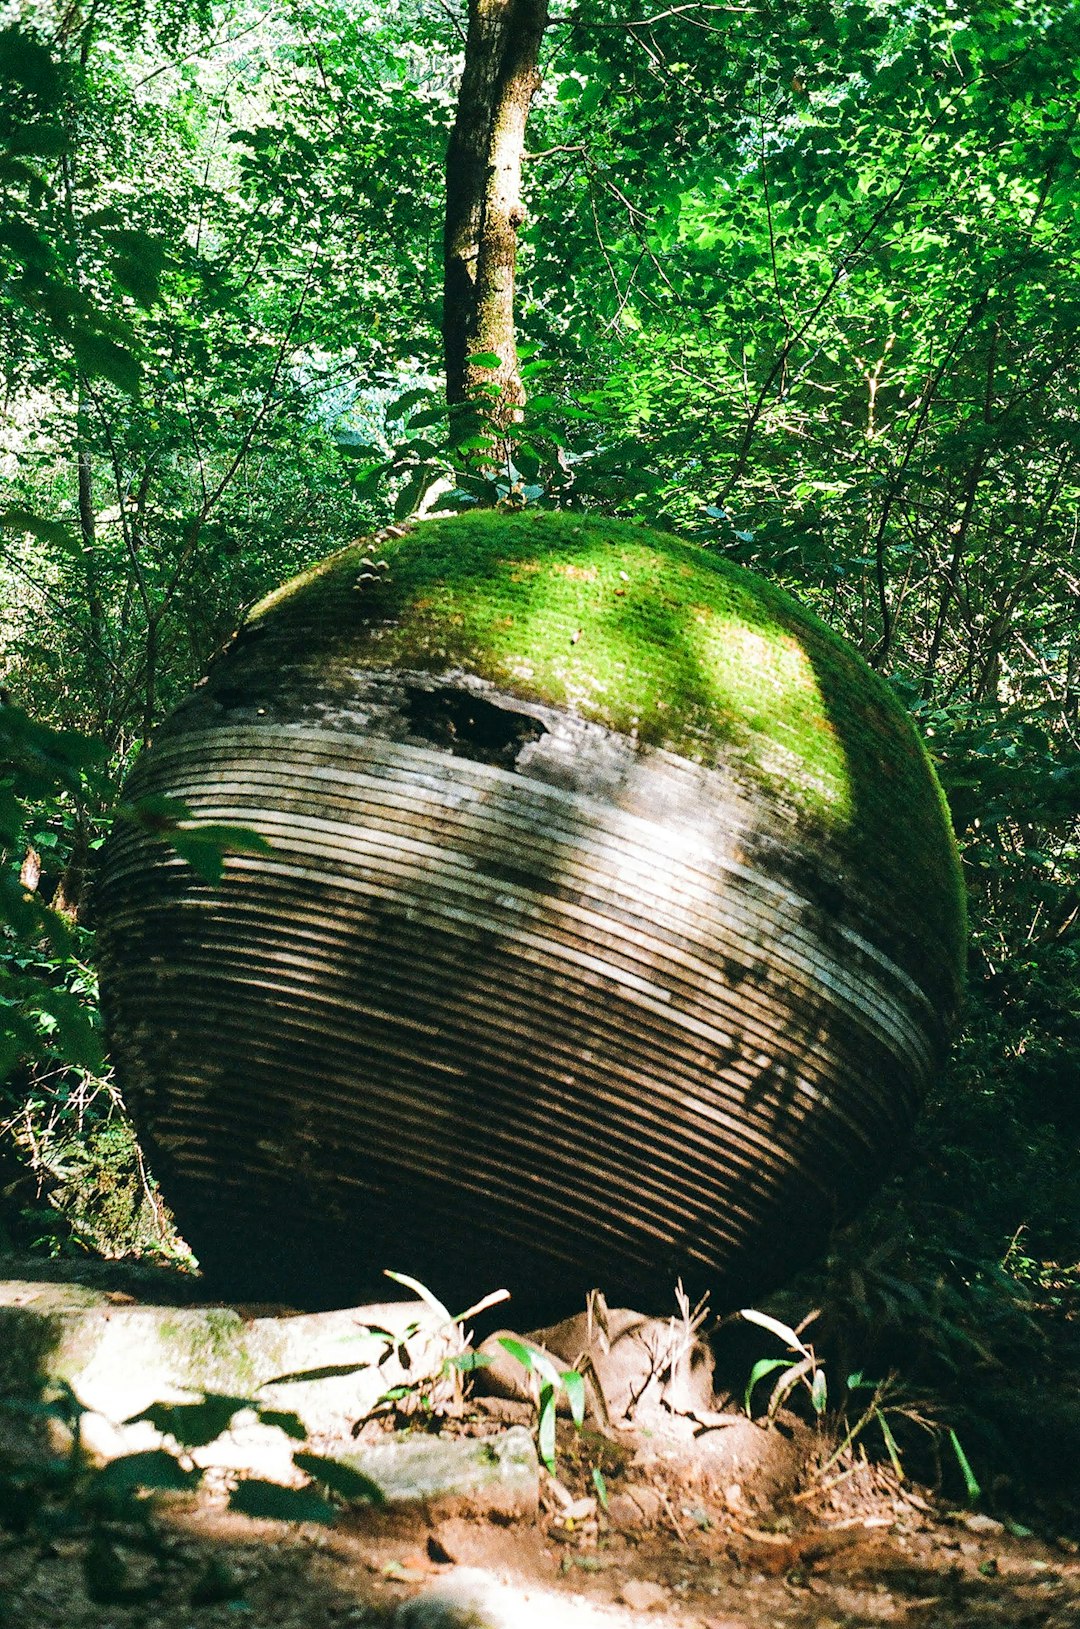 green and brown round ball on brown soil